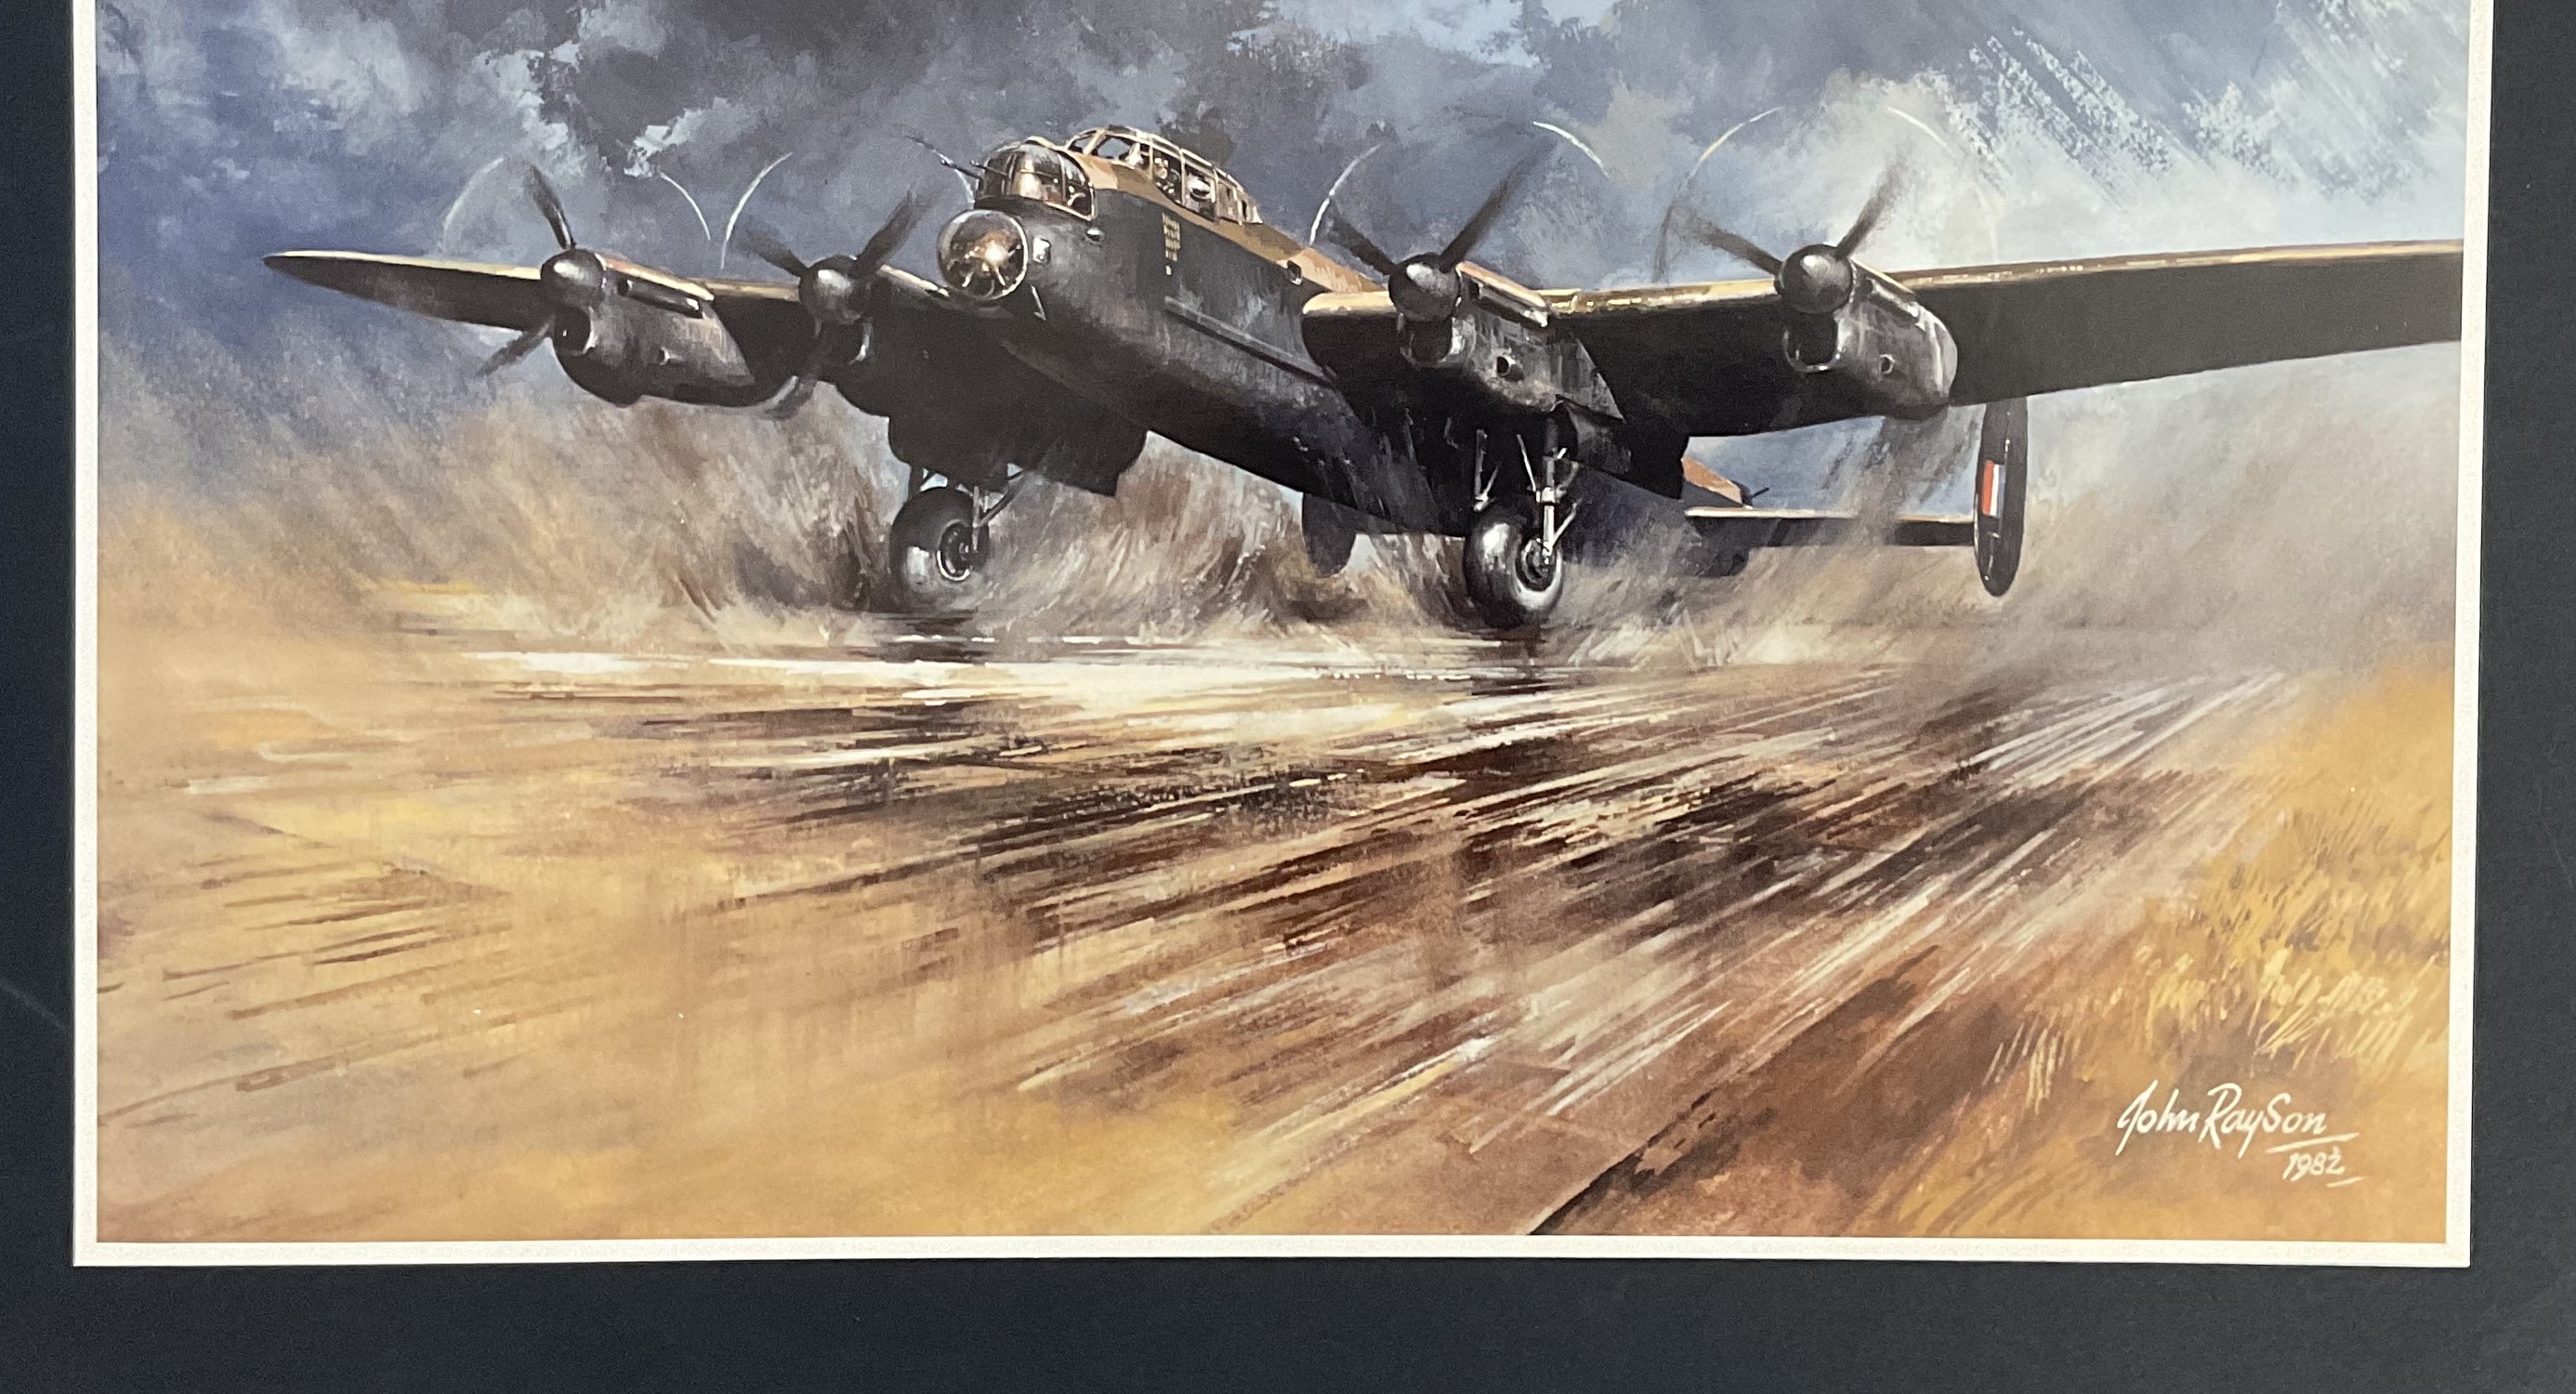 WW2 Colour Print Lancaster Bomber Taking Off By John Rayson 1982. Measures 17x13 inches appx. Very - Image 5 of 6